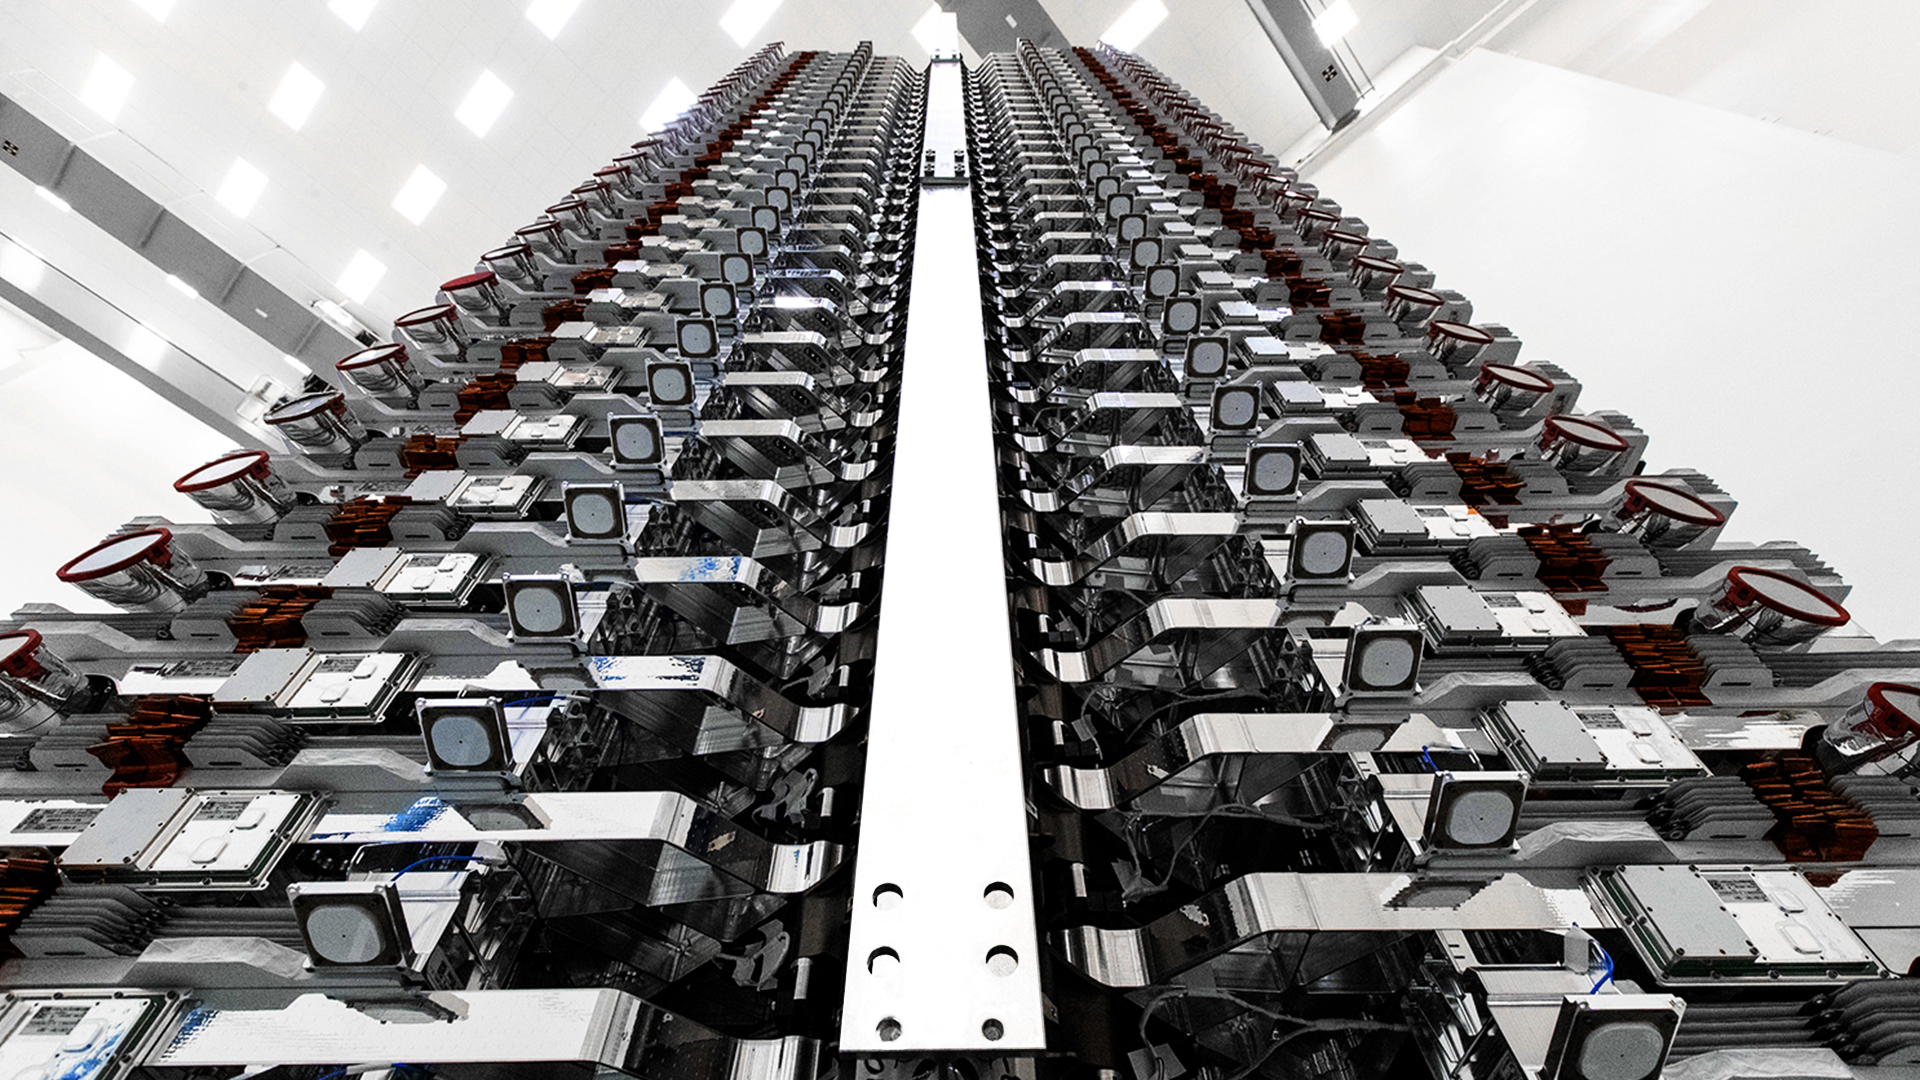 A stack of 60 Starlink v0.9 satellites are prepared for their orbital launch debut in May 2019. (SpaceX)